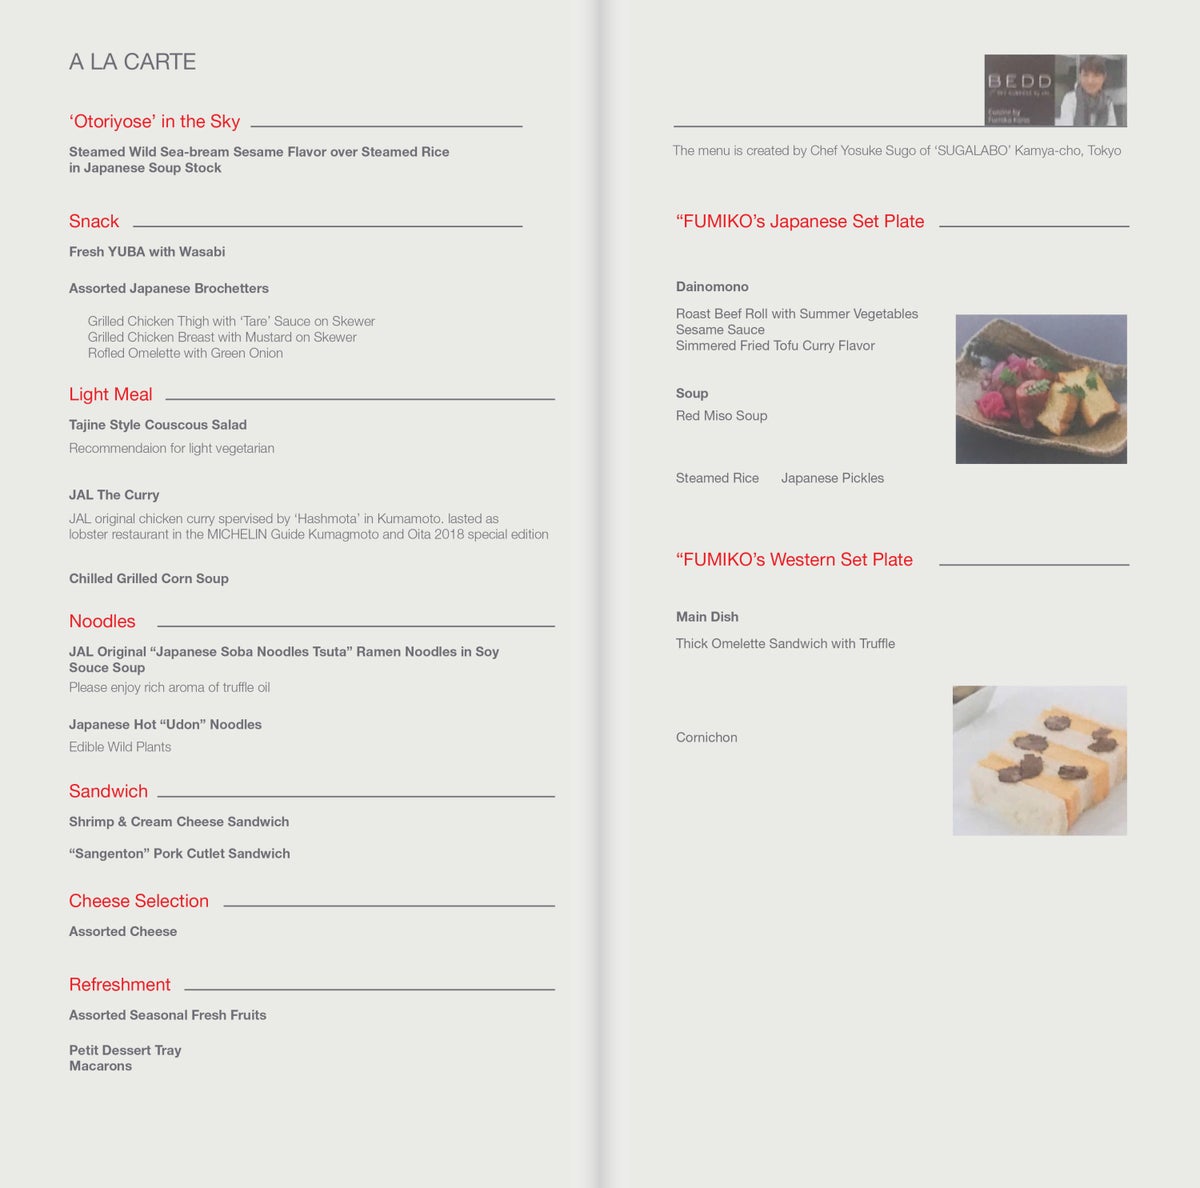 Japan Airlines Boeing 777 300ER First Class Snack menu